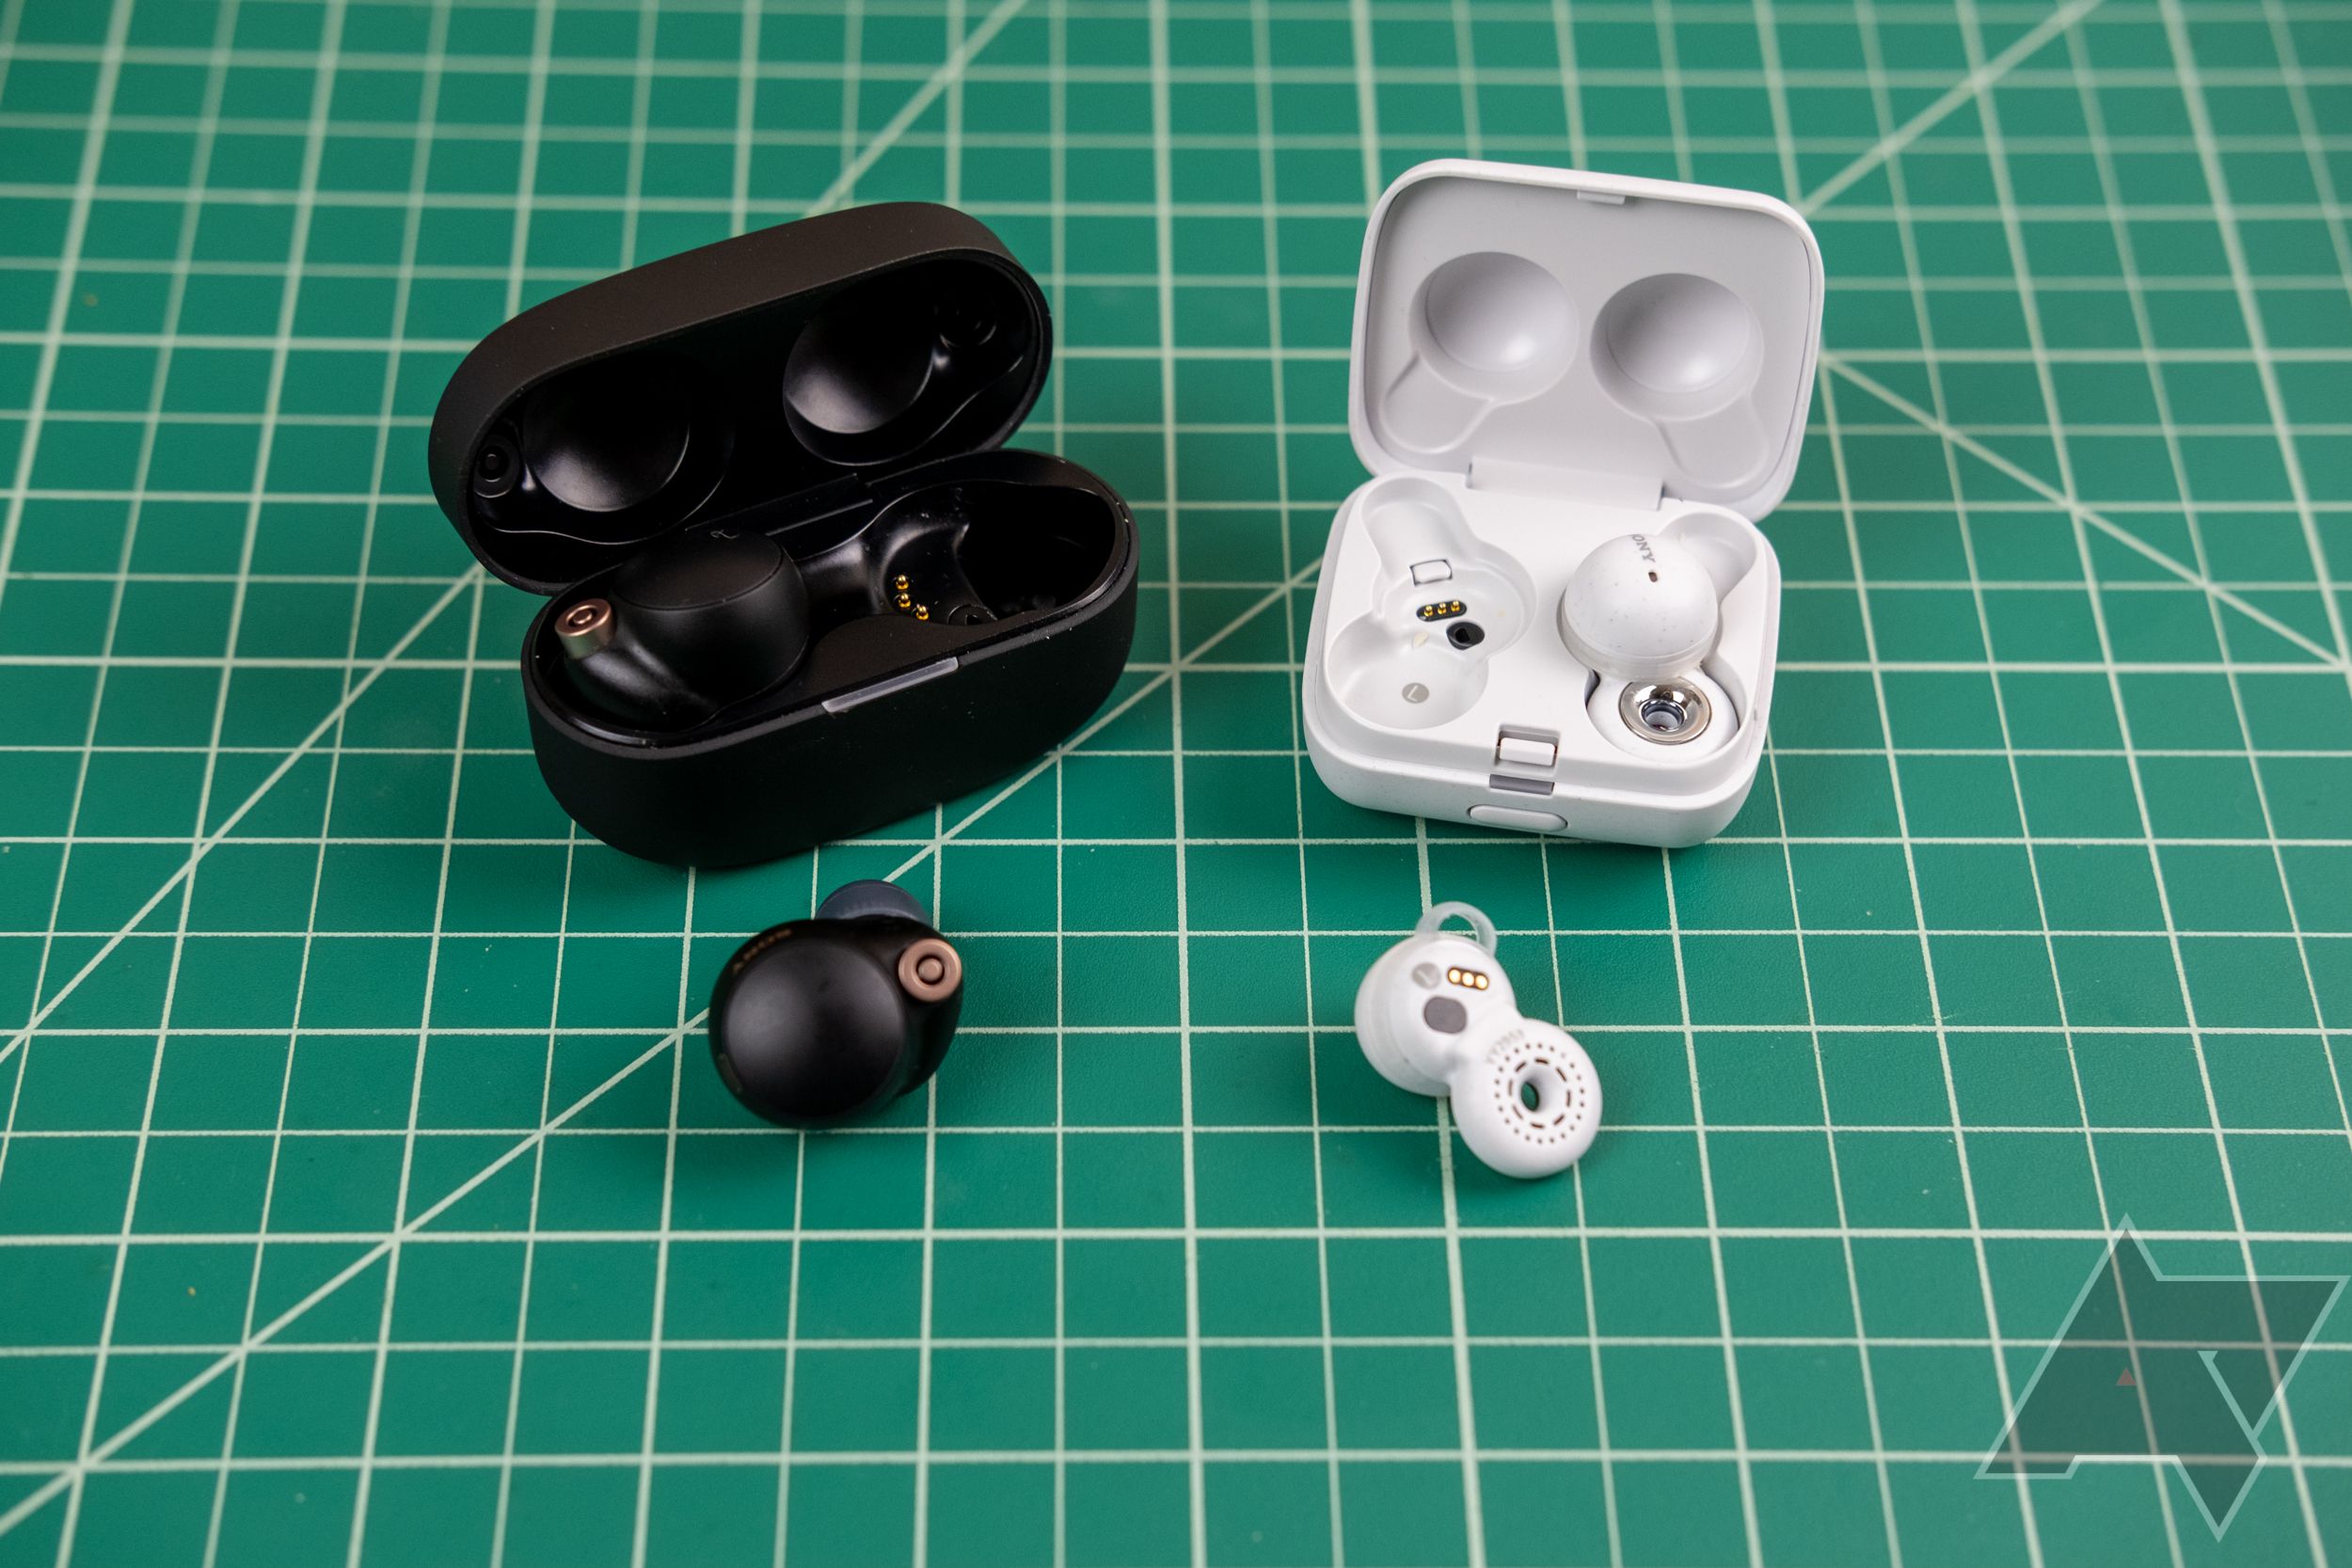 Sony's upcoming LinkBuds S look set to be some of the smallest ANC earbuds on the market